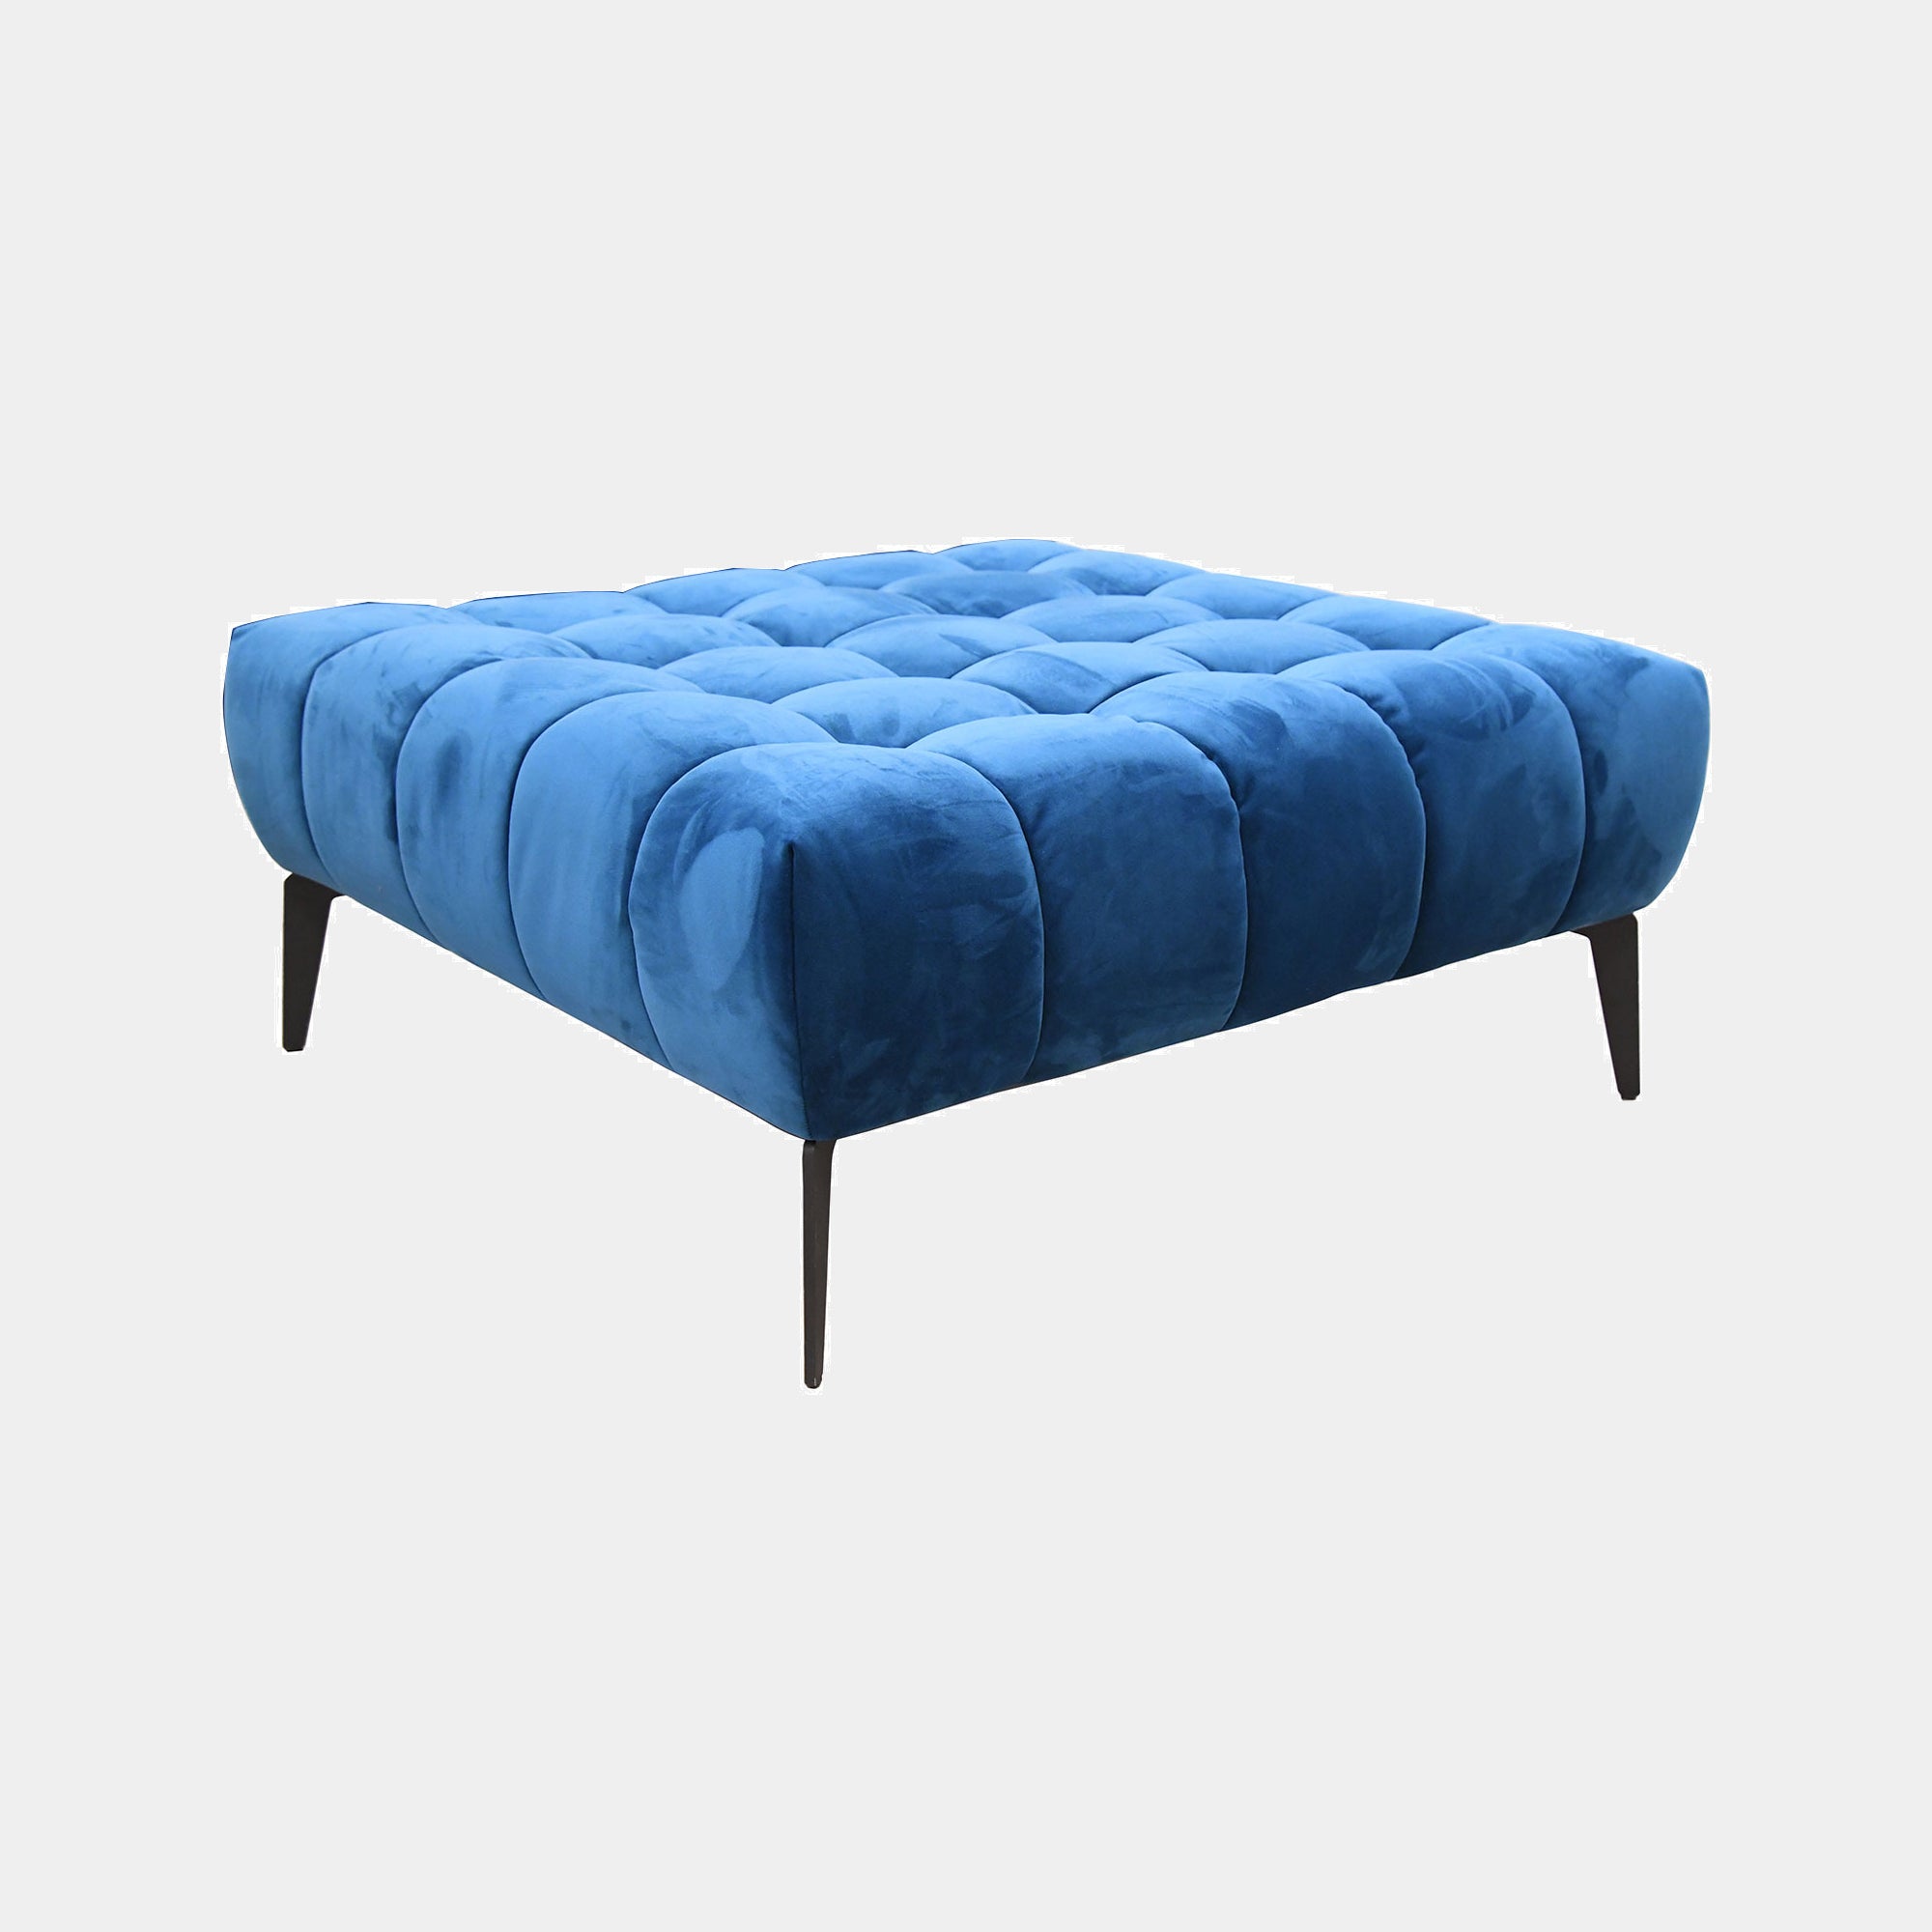 Large Square Footstool In Grade BSF20 Fabric TX1226 Teal